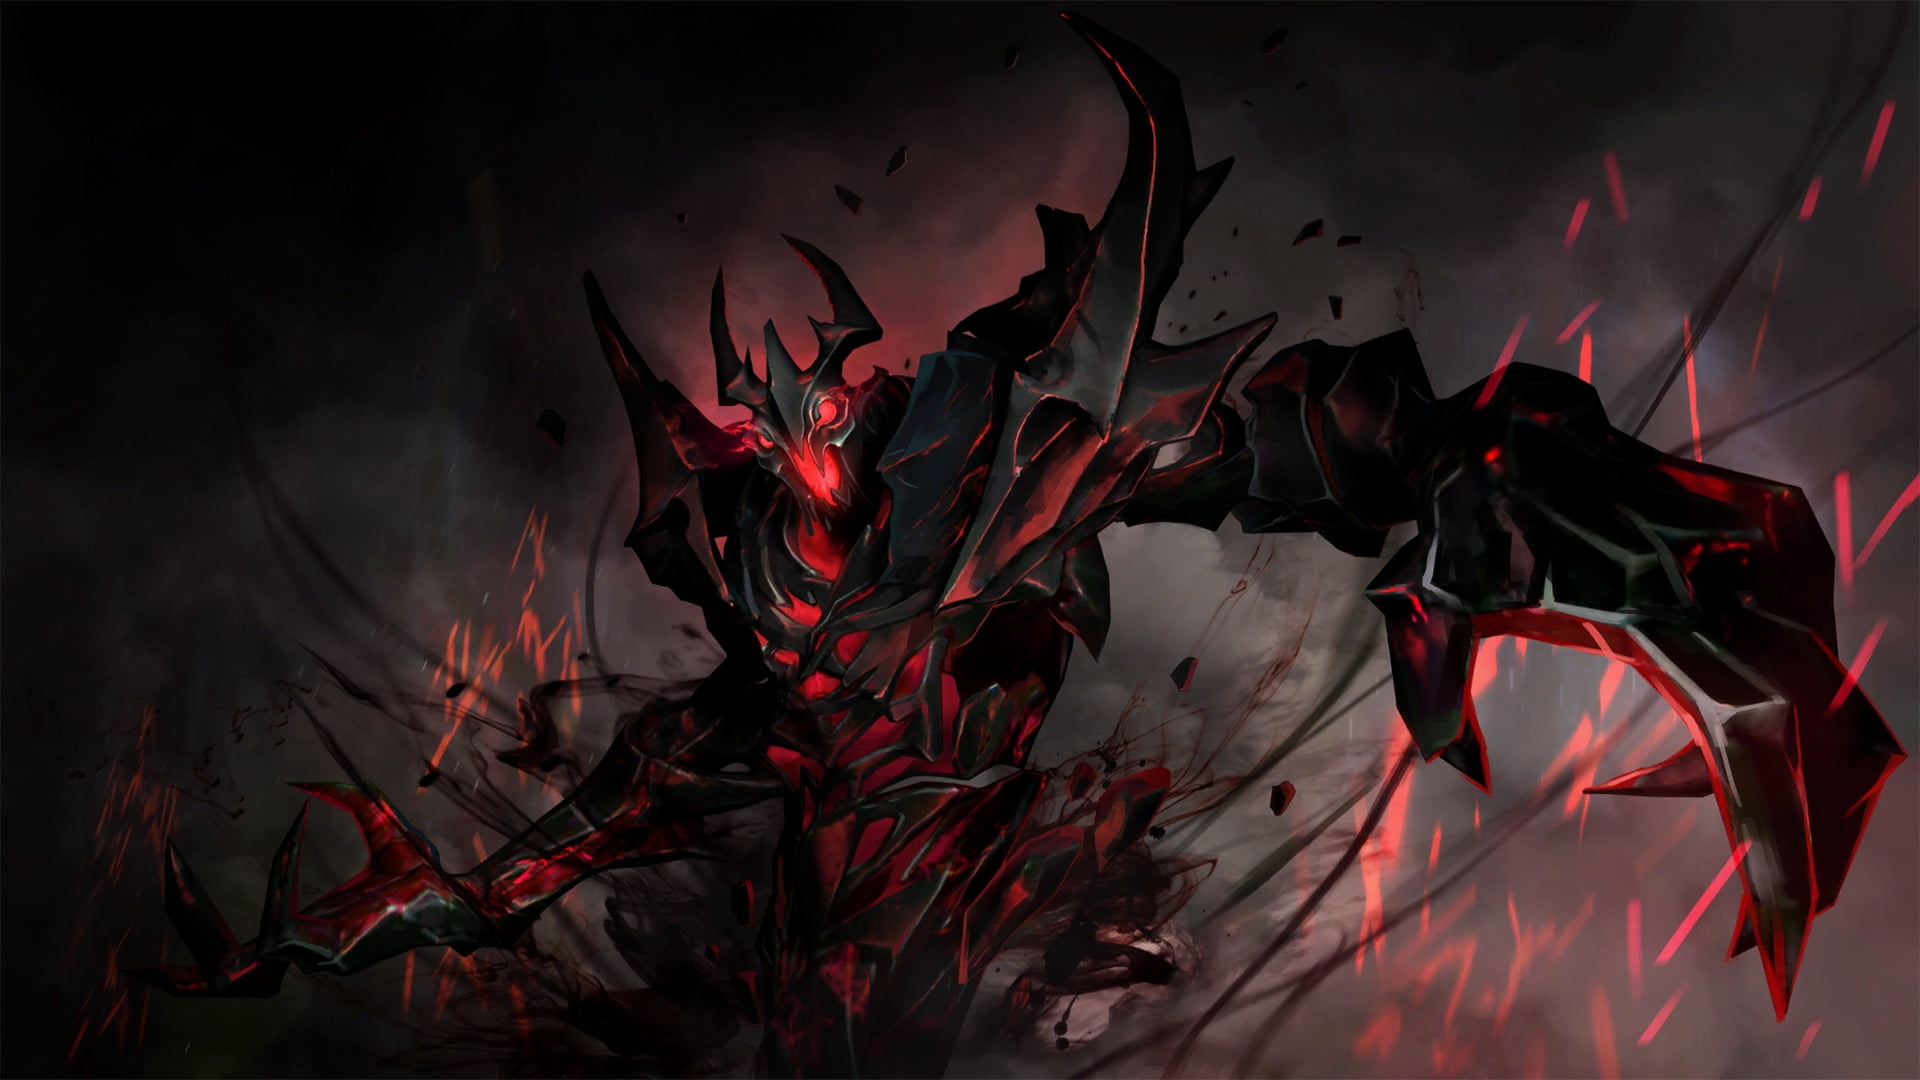 dota 2, shadow fiend, art, dark, abstract, backgrounds, flame